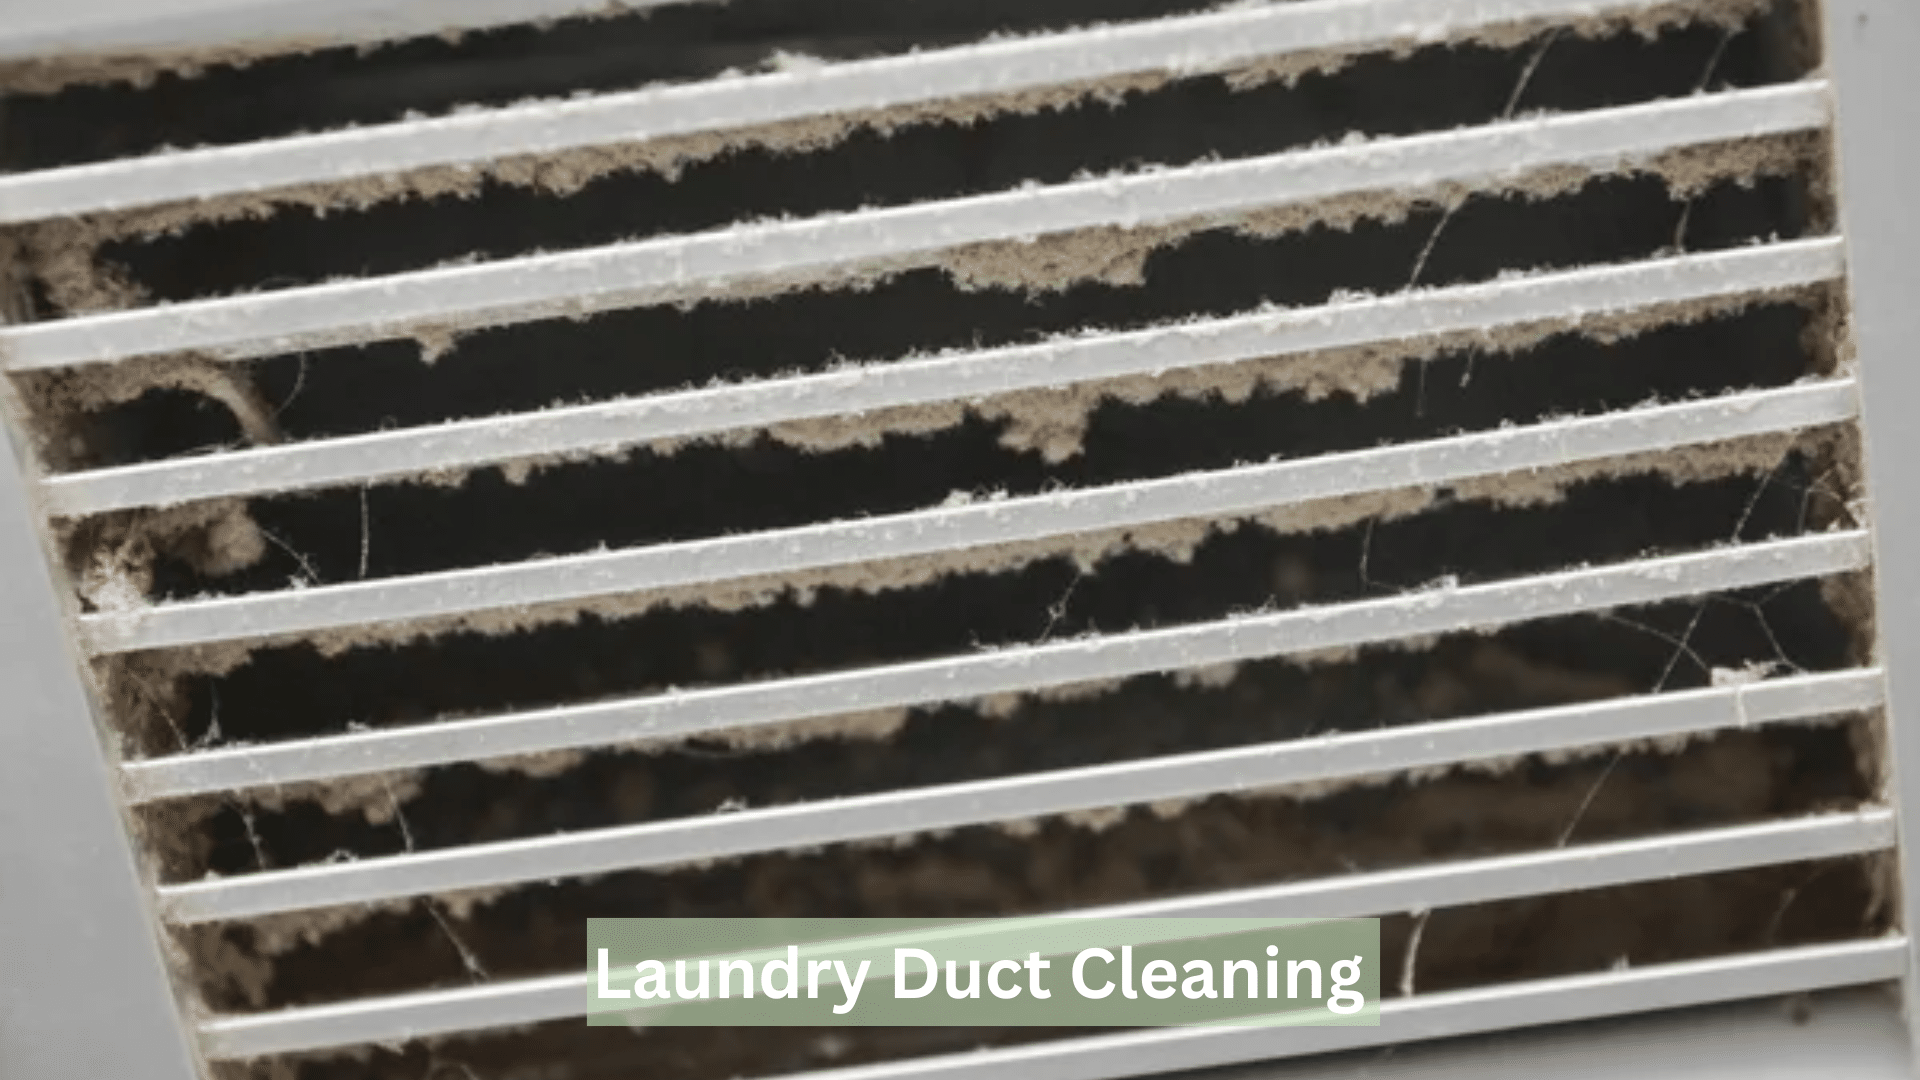 Laundry Duct Cleaning Services